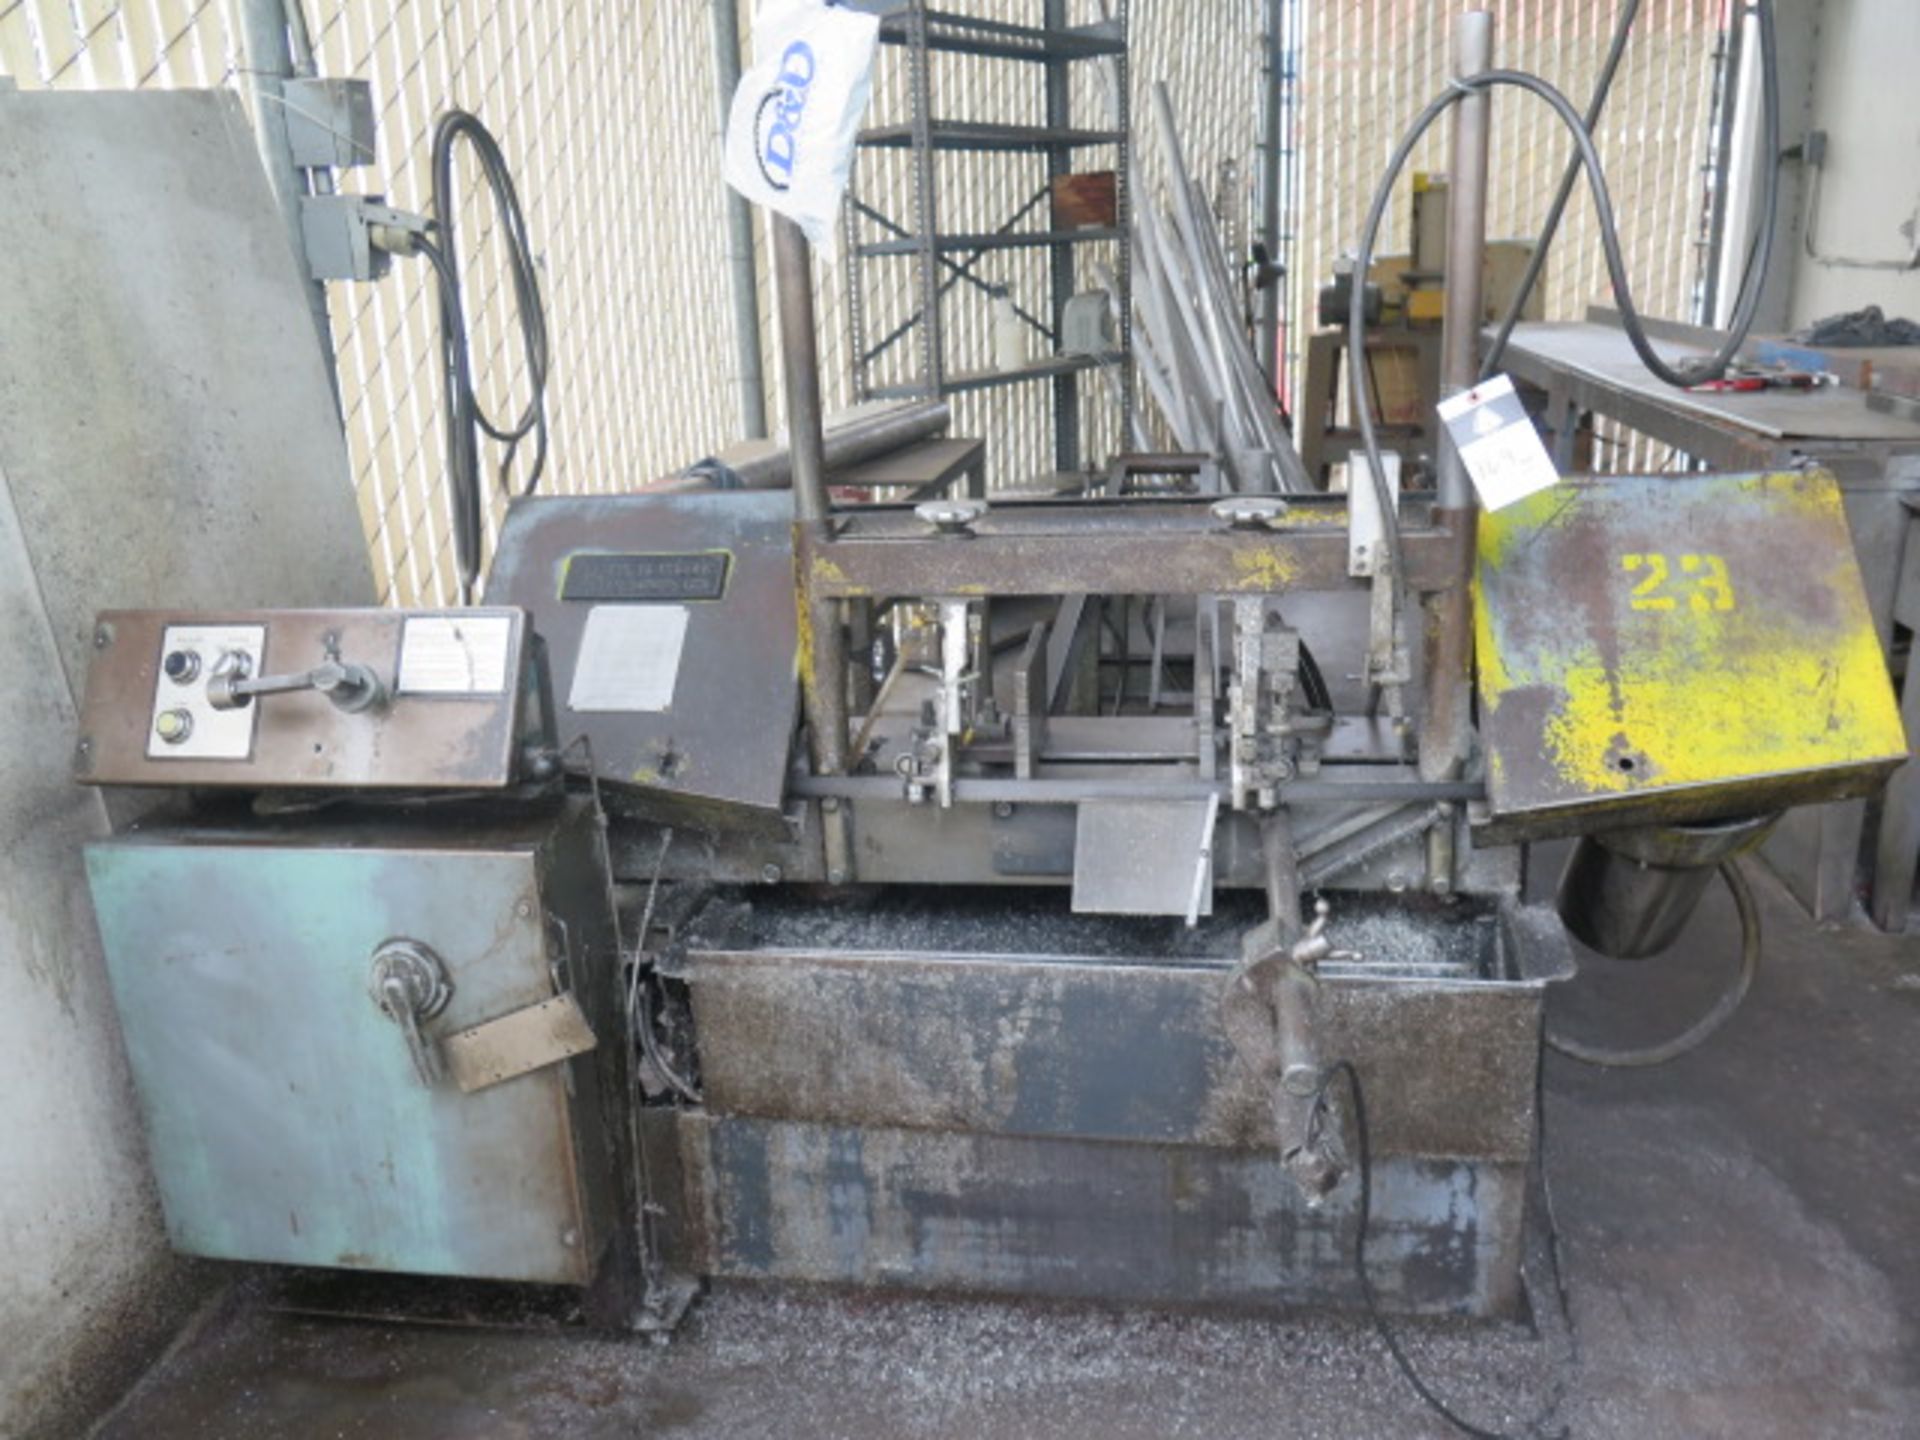 W.F. Wells Automatic 9" Horizontal Band Saw w/ Work Stop, Coolant (SOLD AS-IS - NO WARRANTY)